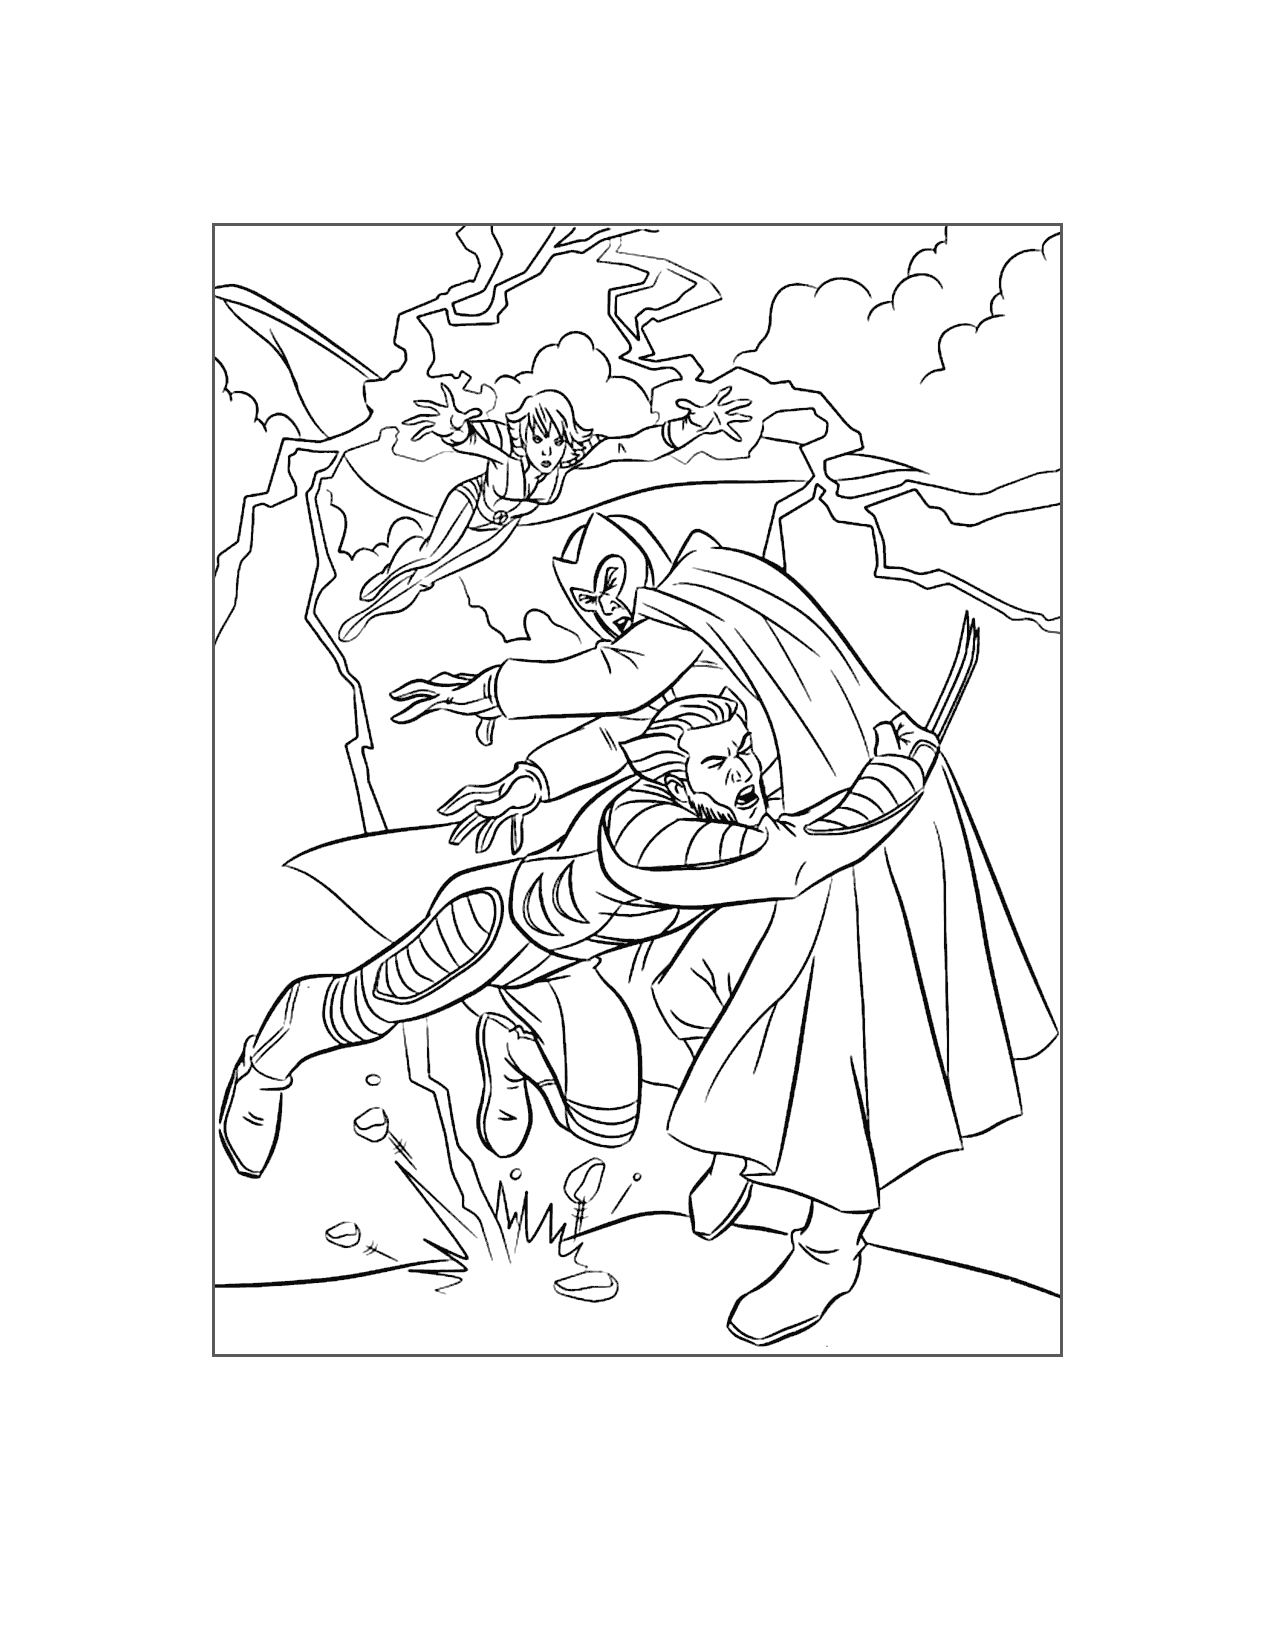 Wolverine Fighting Magneto Coloring Page